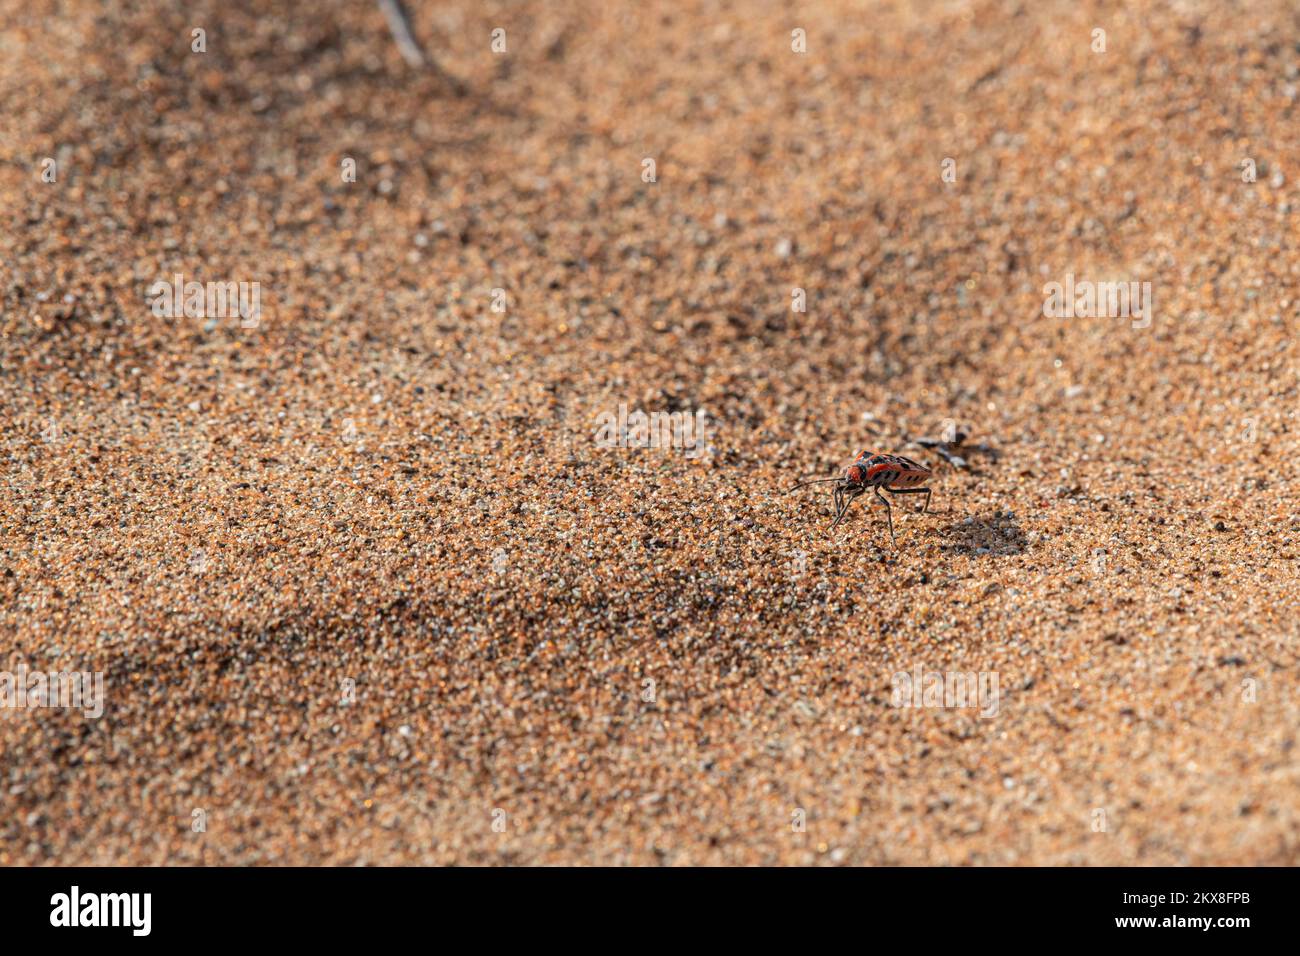 Side view of an Insect in the sand of a dune, supposely Black-and-Red-bug or Lygaeus equestris, desert of the United Arab Emirates Stock Photo